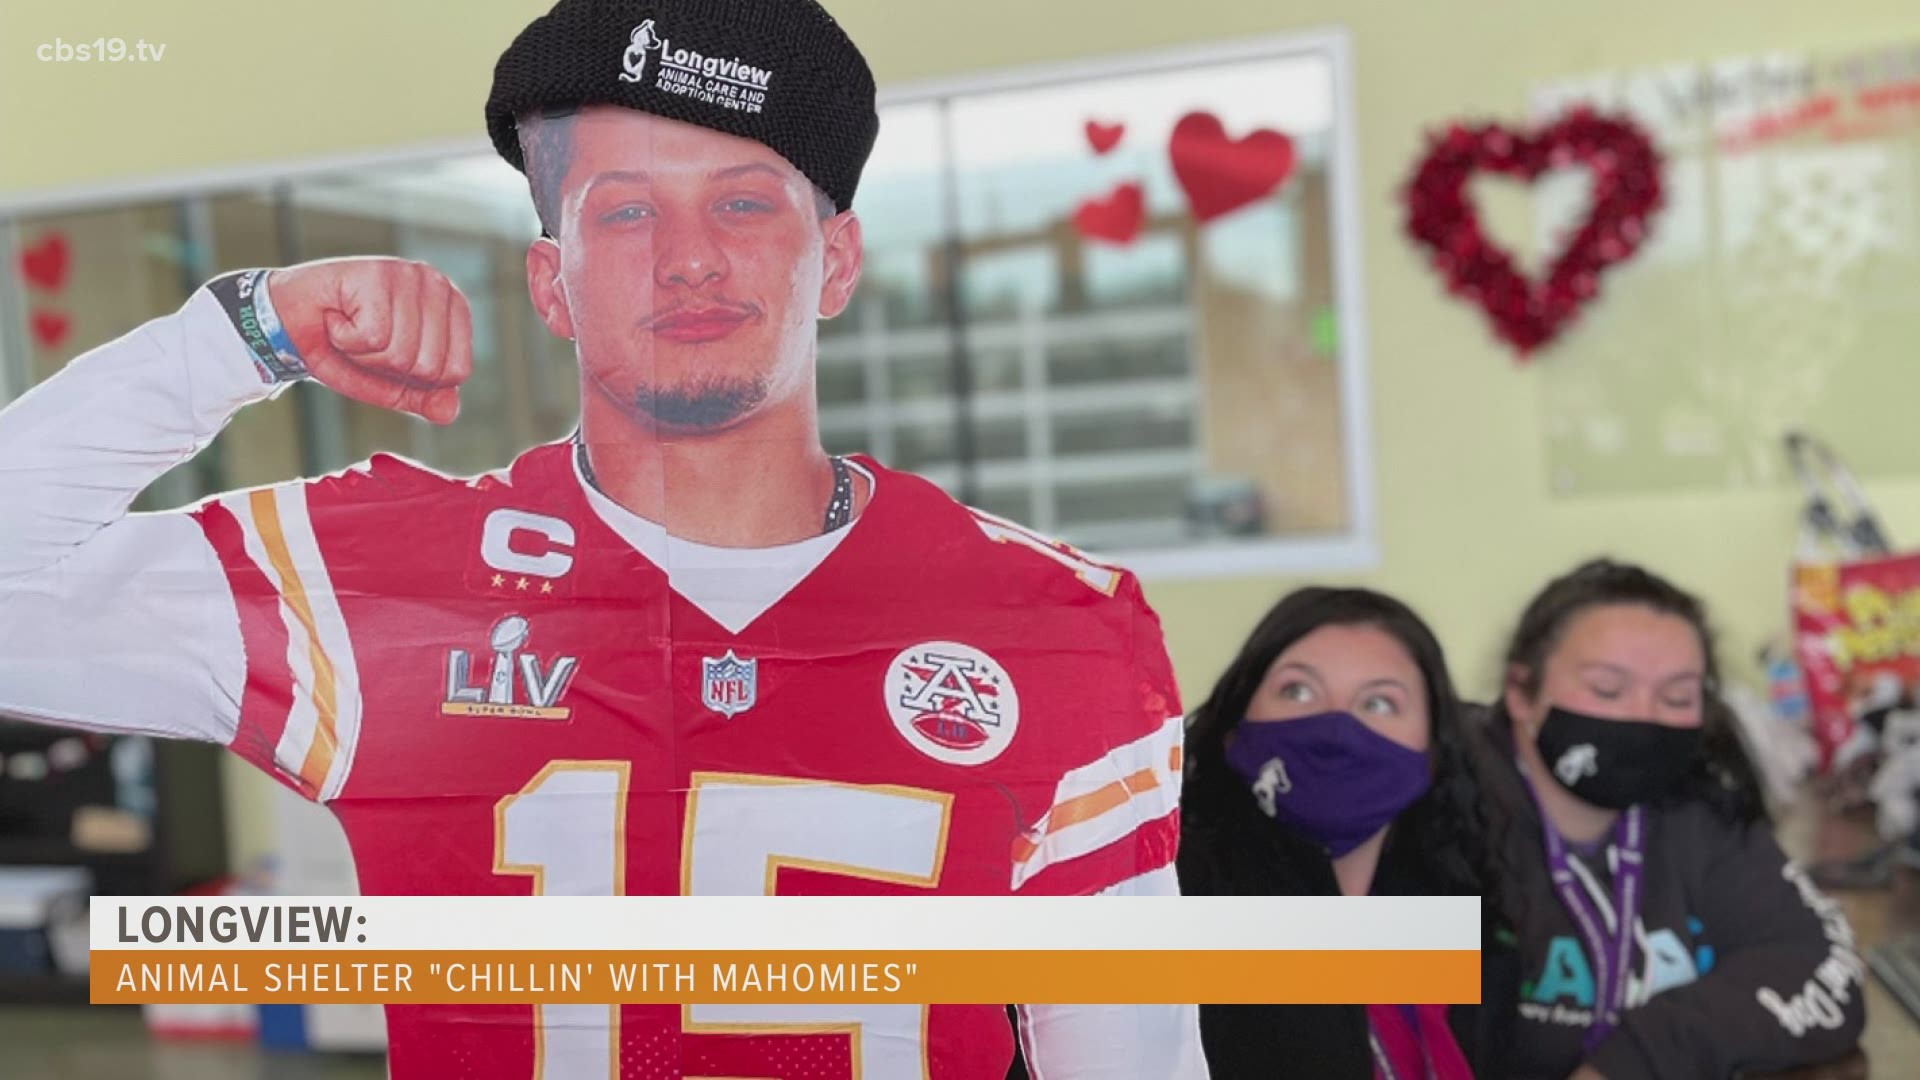 Longview Animal Shelter gets "special visit" from life-size cardboard quarterback Patrick Mahomes